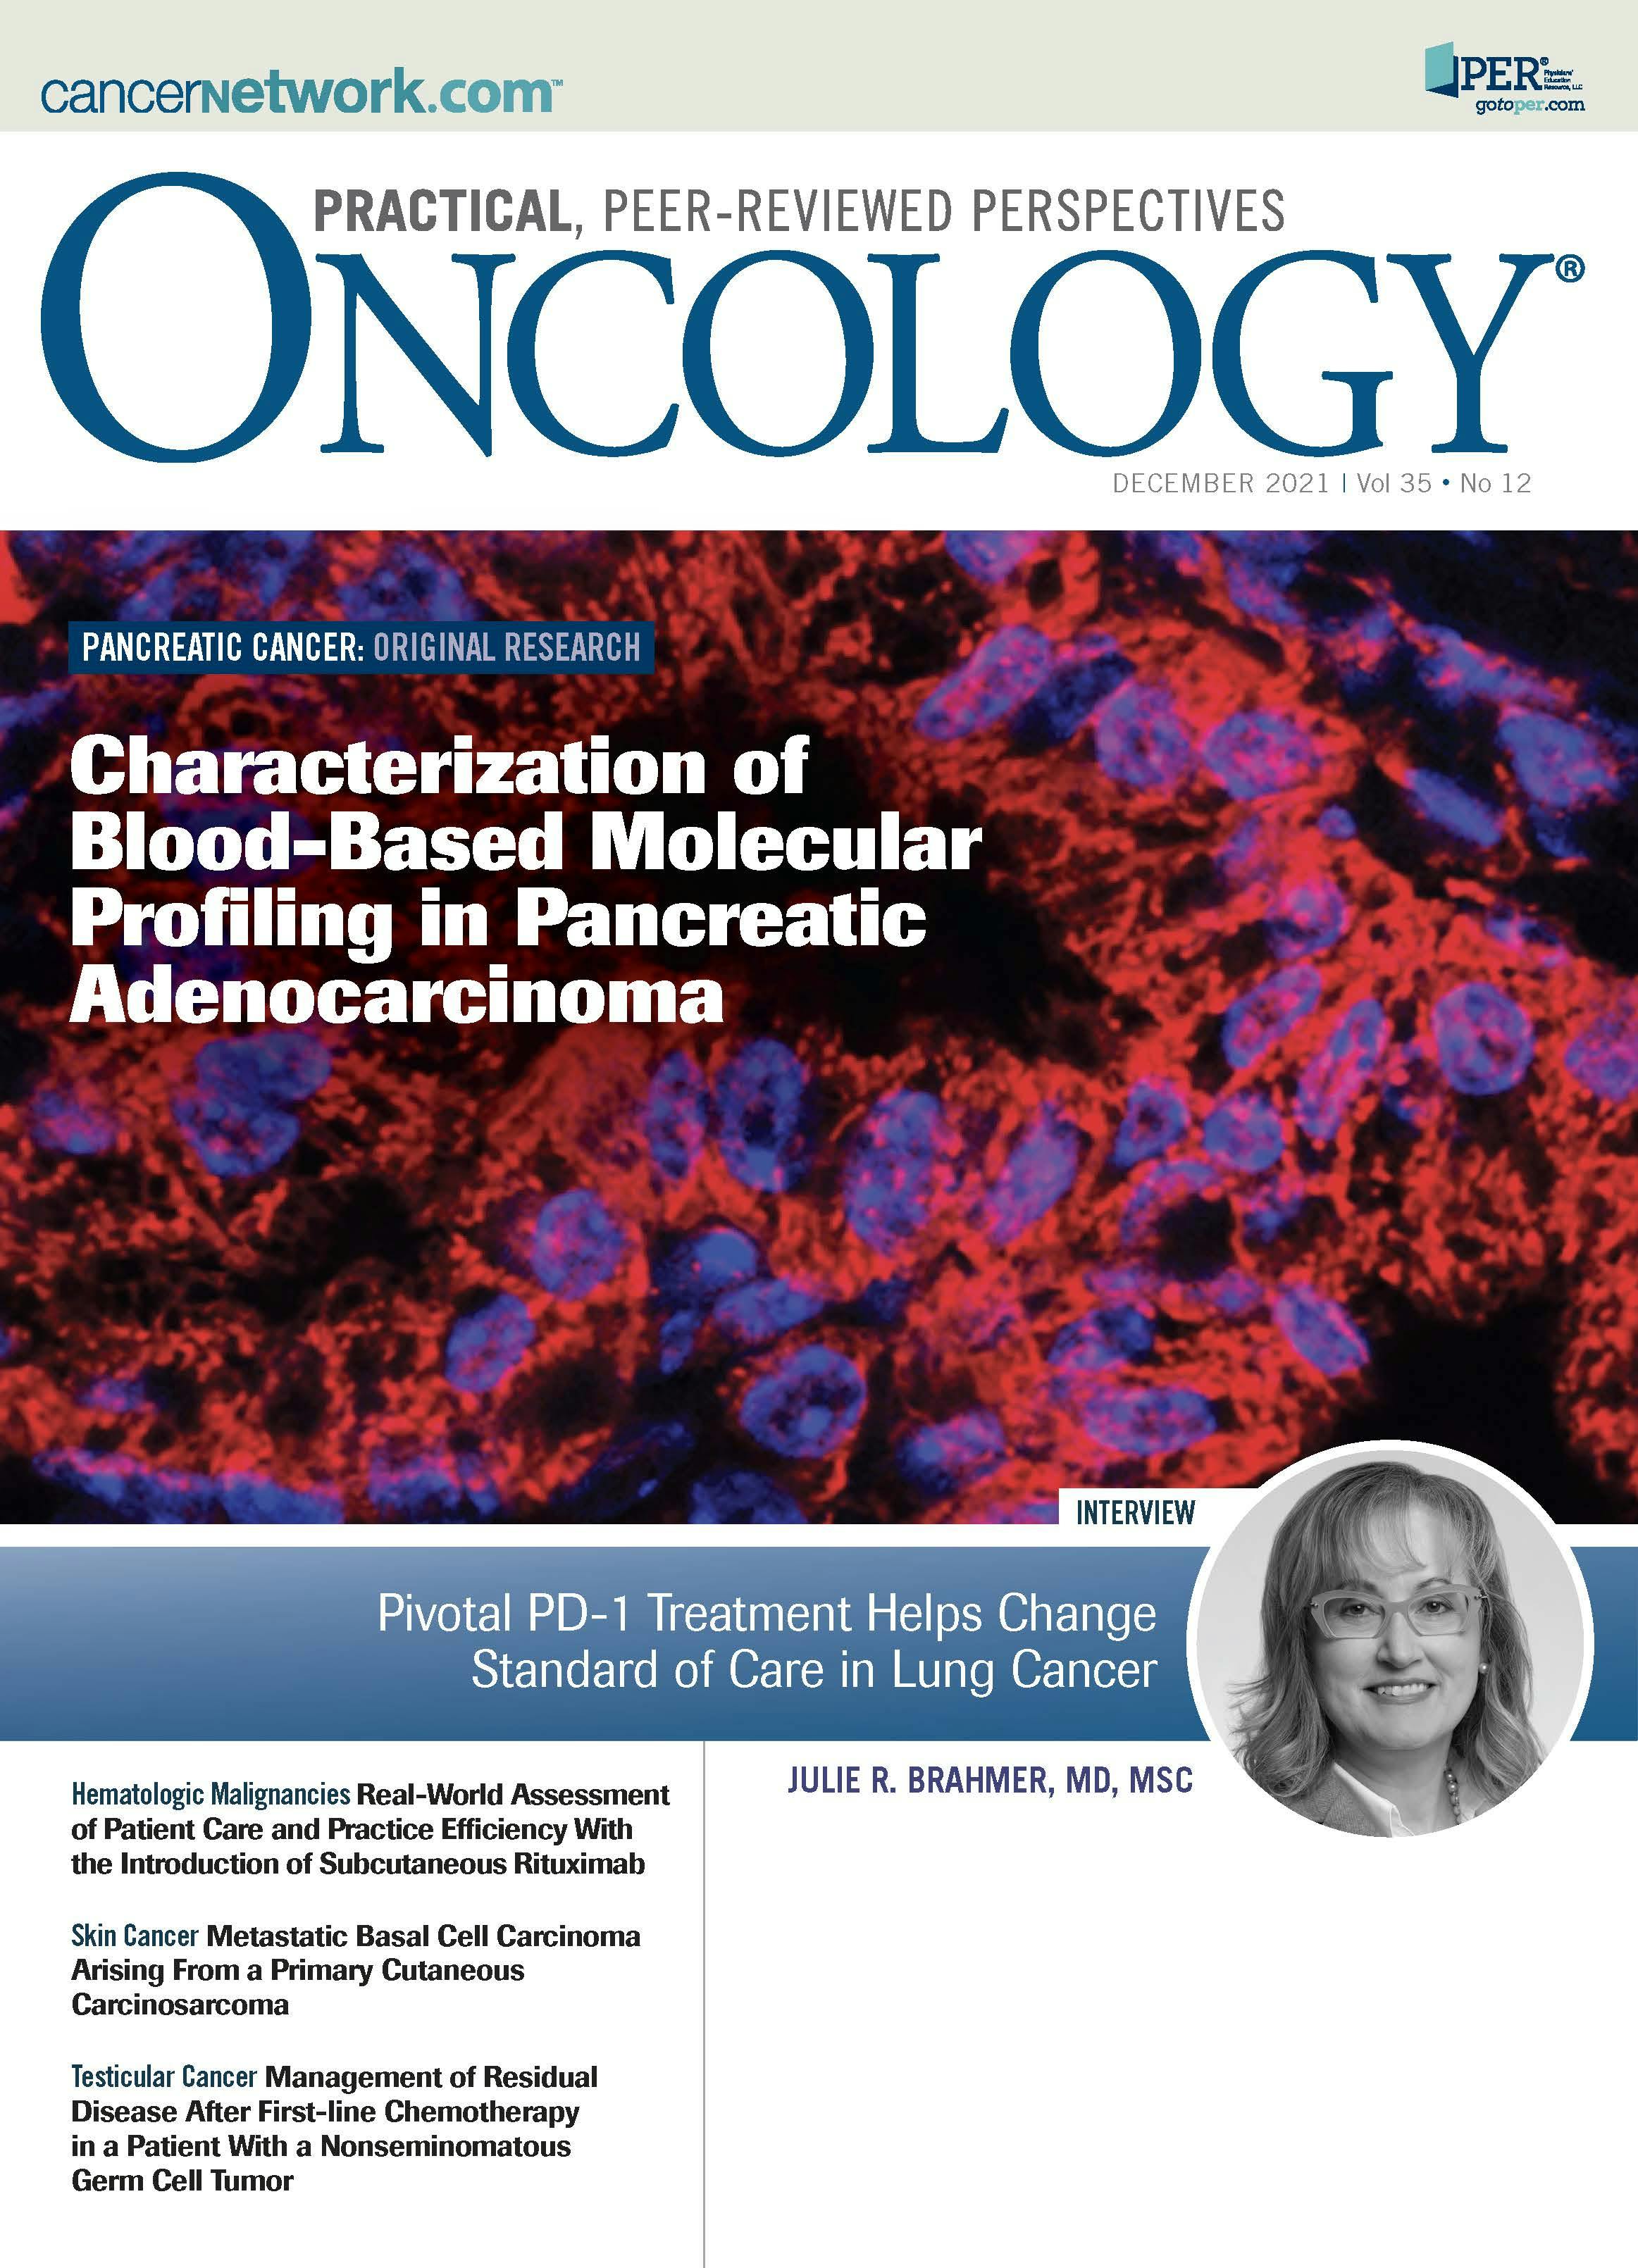 ONCOLOGY Vol 35, Issue 12